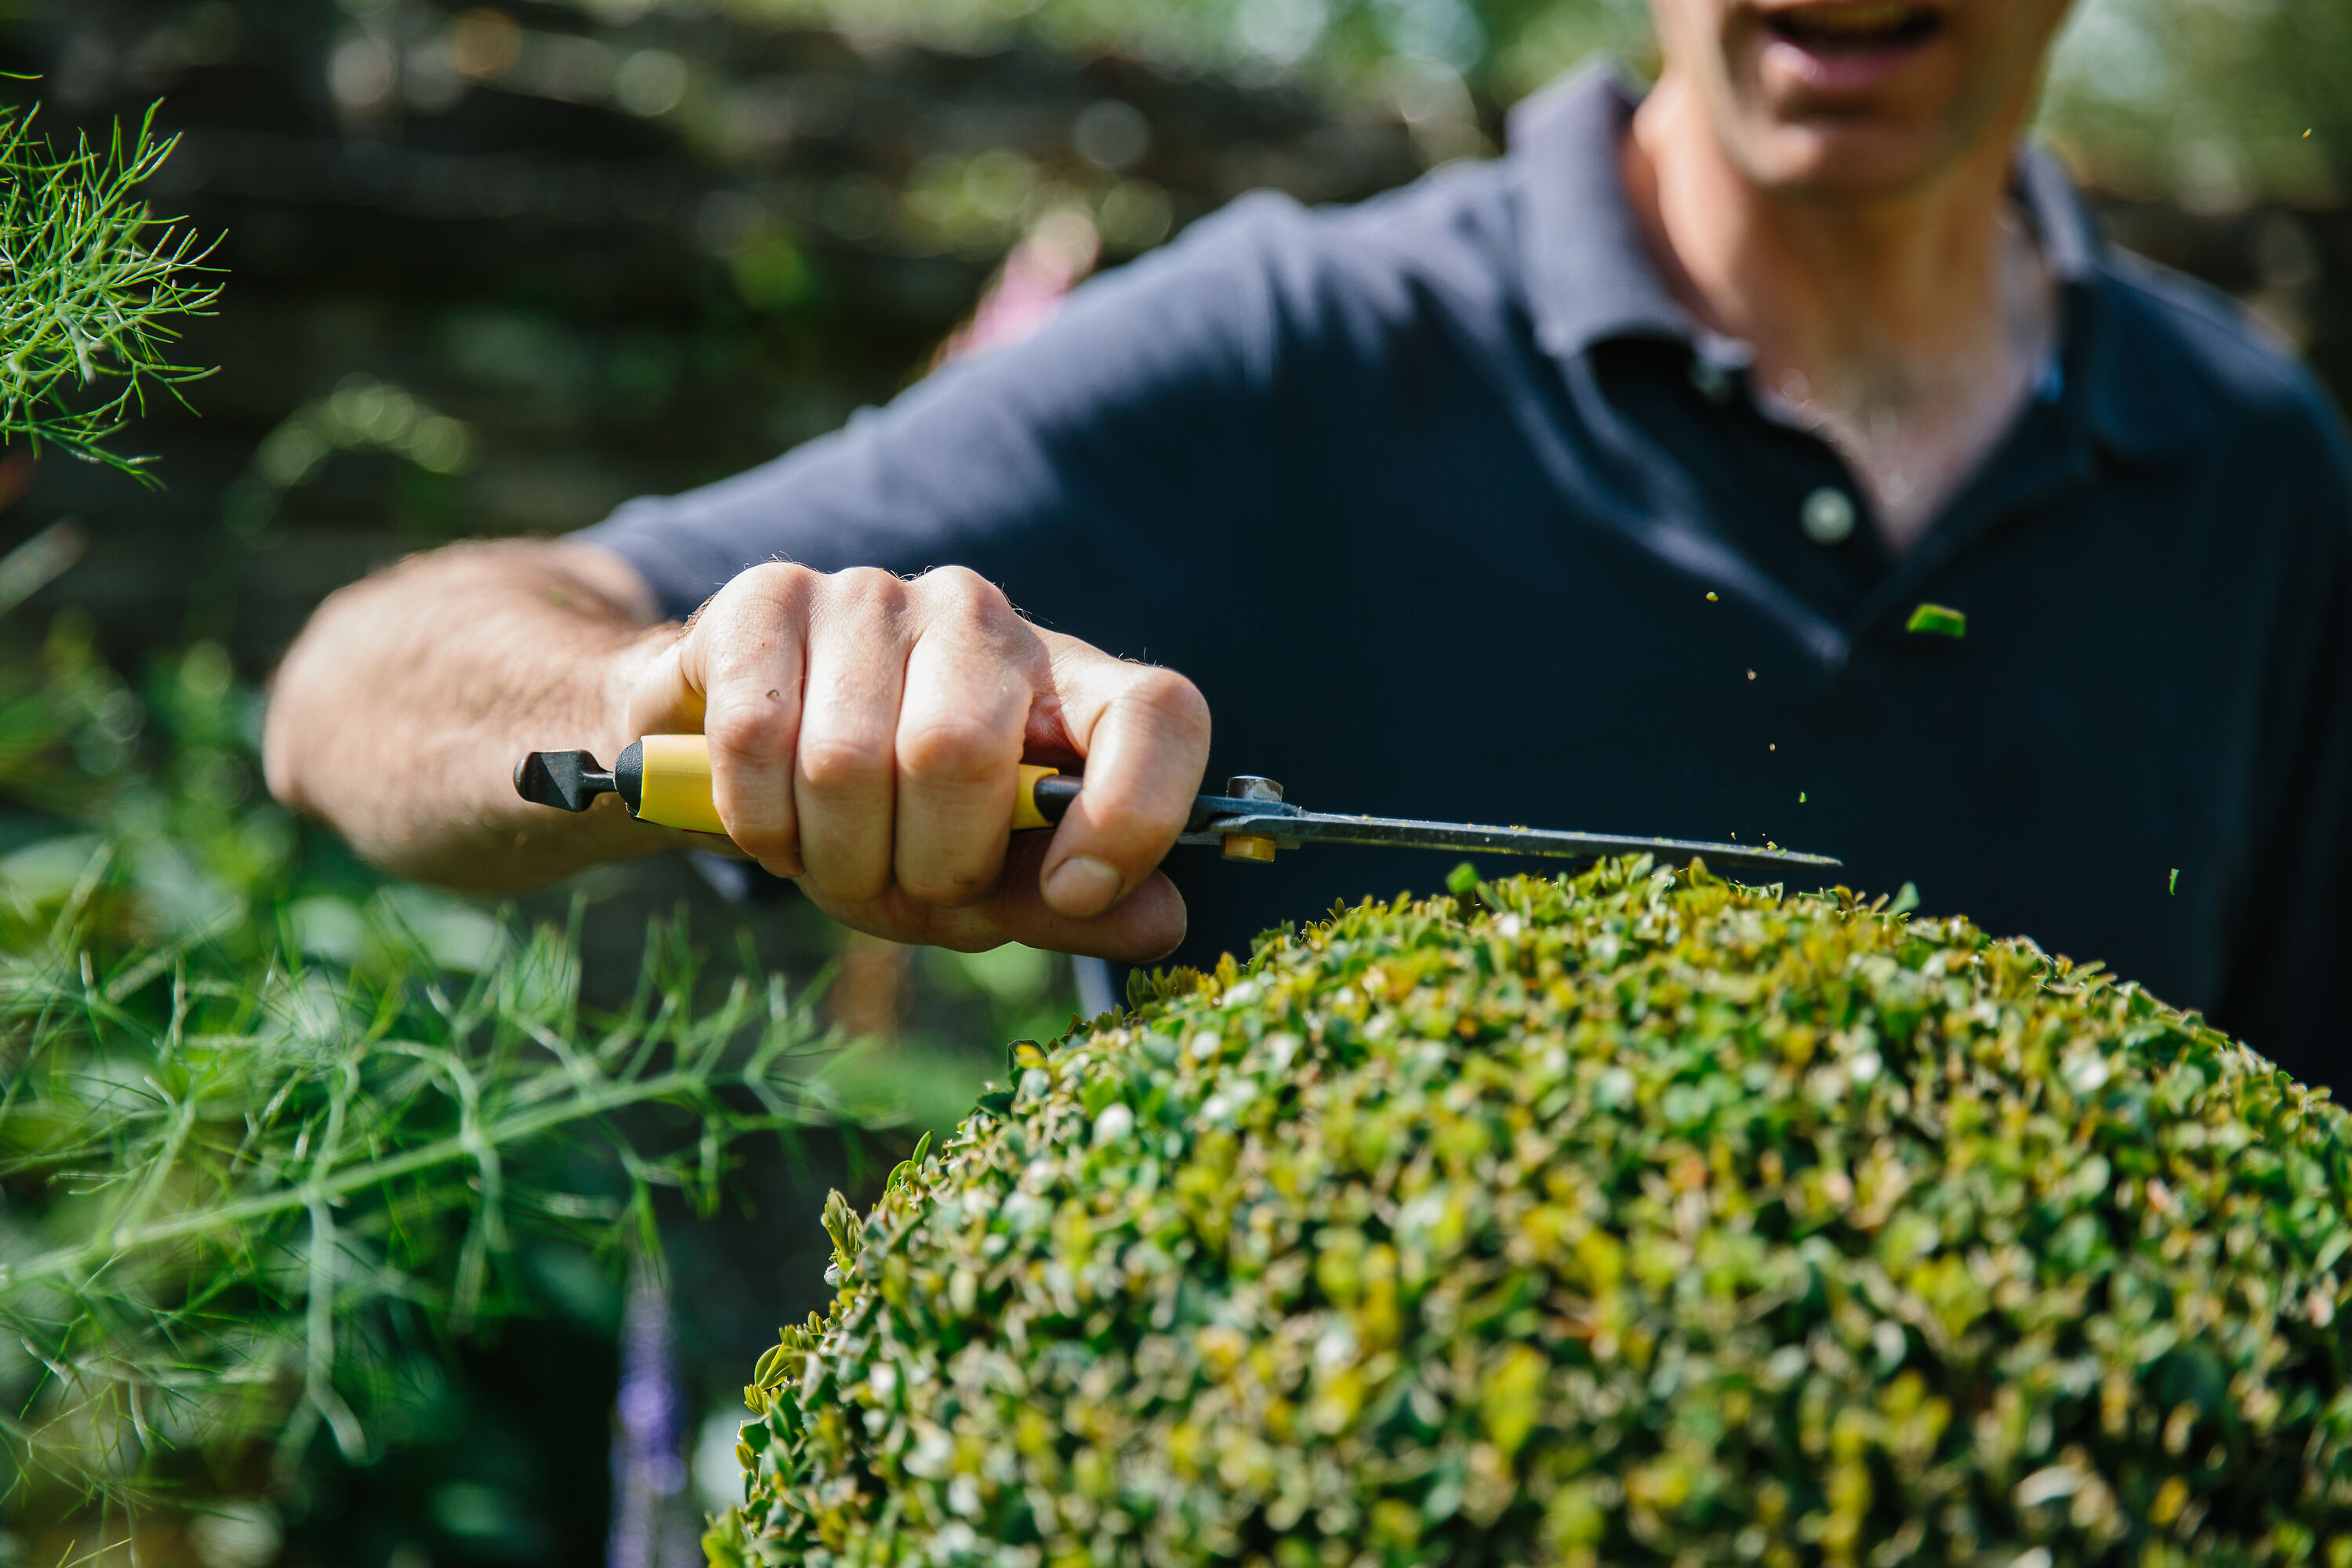 Tobisho Topiary Clippers - ideal for box clipping